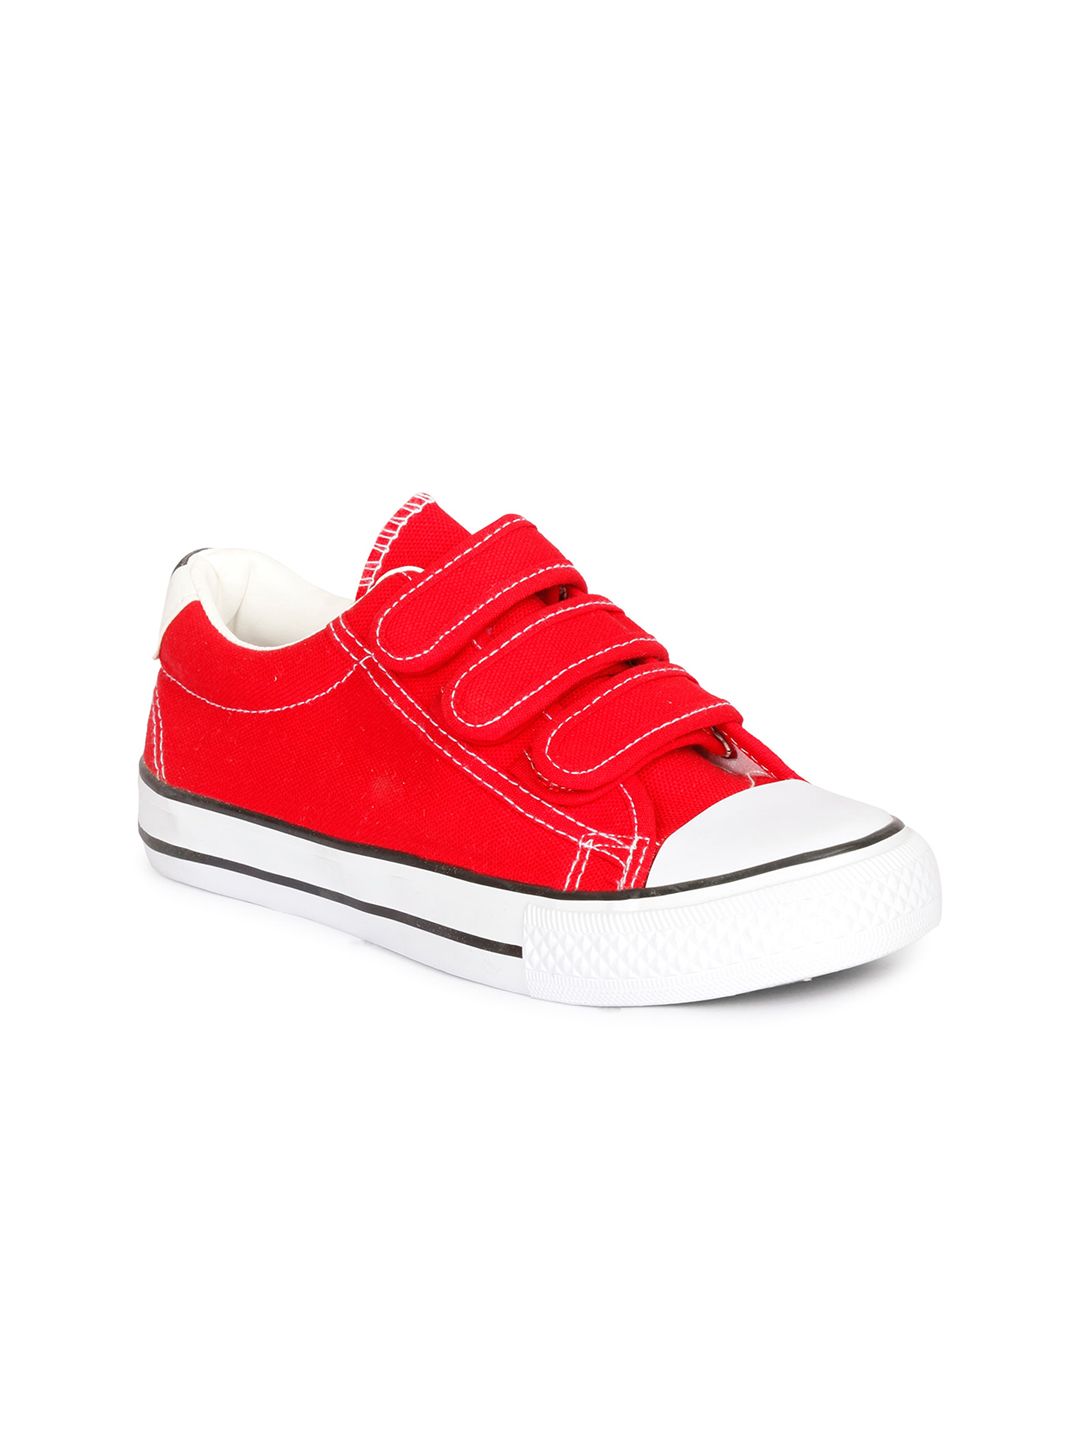 CIPRAMO SPORTS Women Red Sneakers Price in India